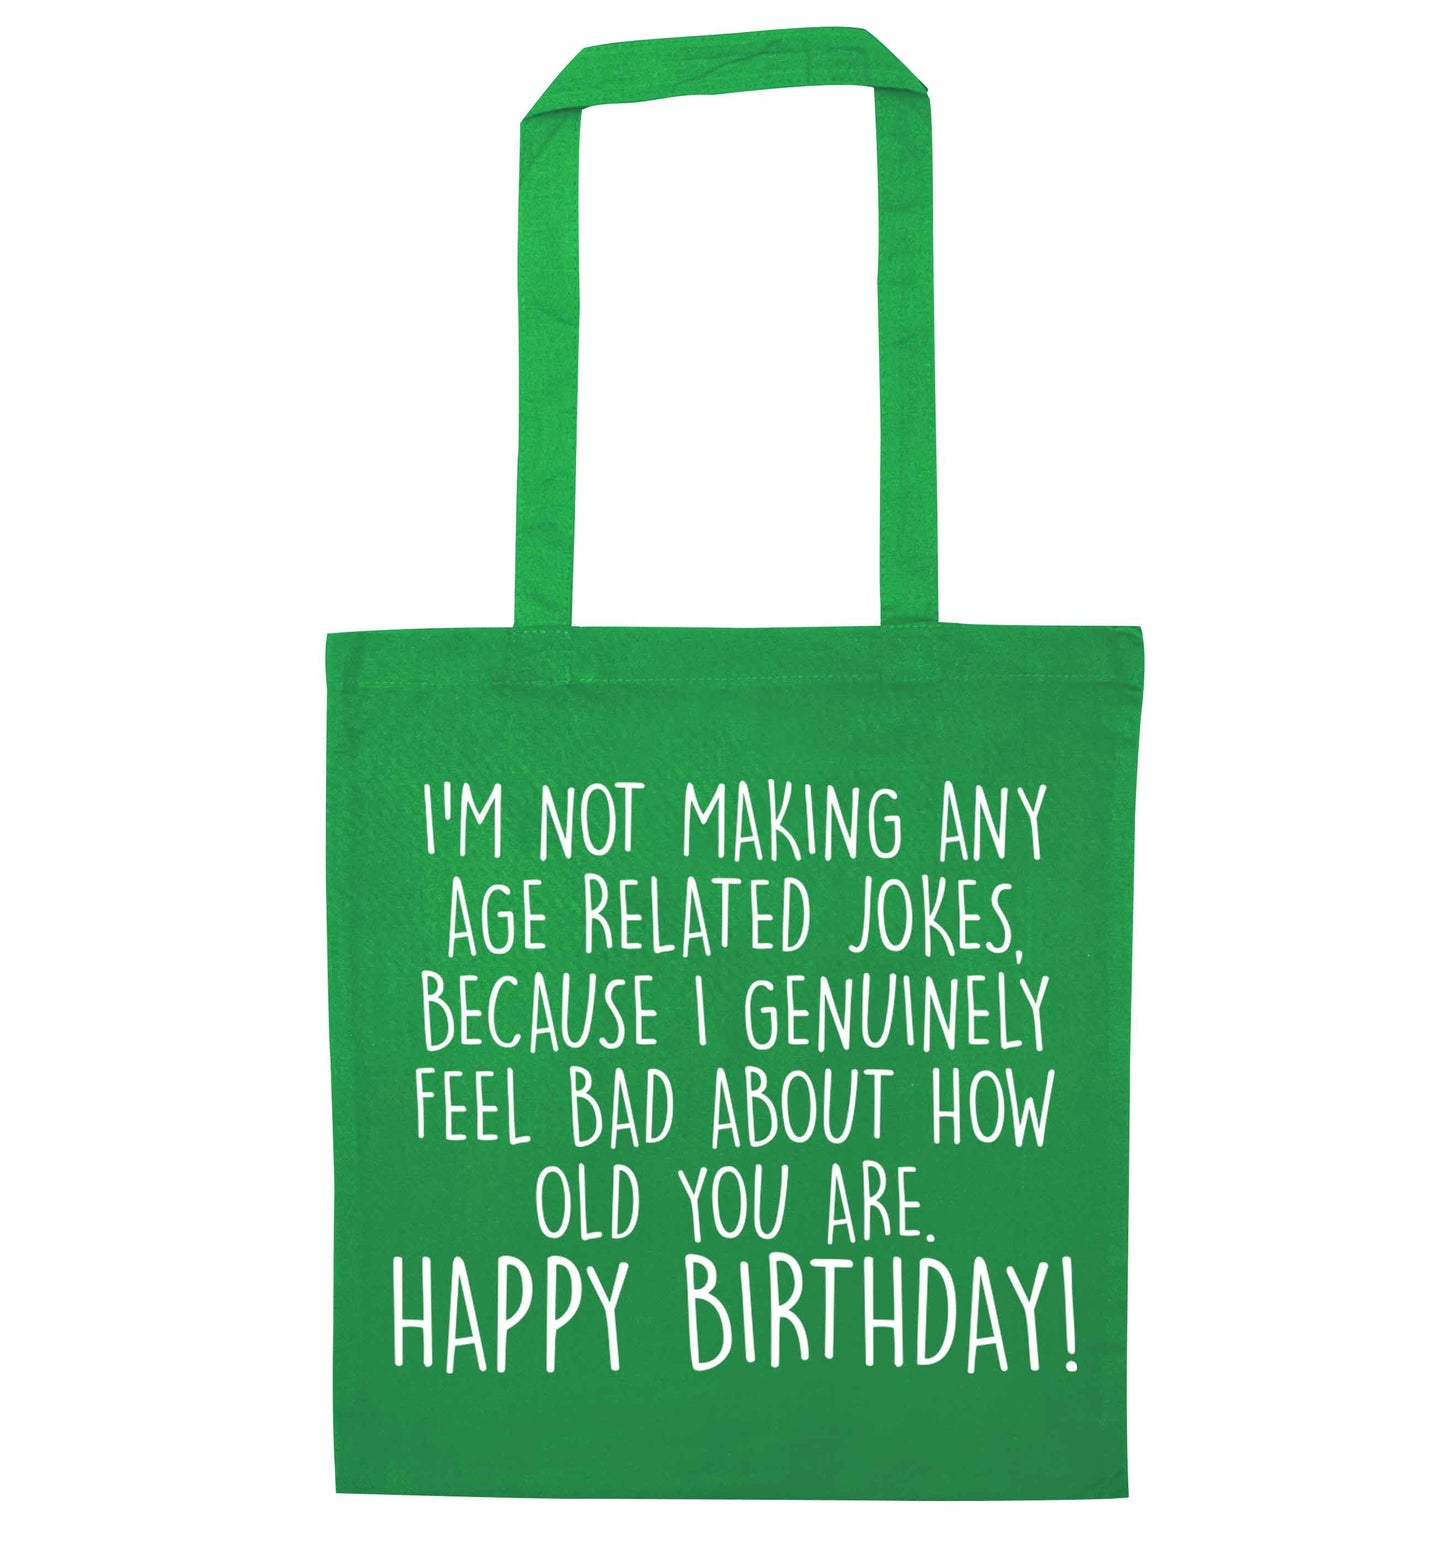 I'm not making any age related jokes because I genuinely feel bad for how old you are green tote bag